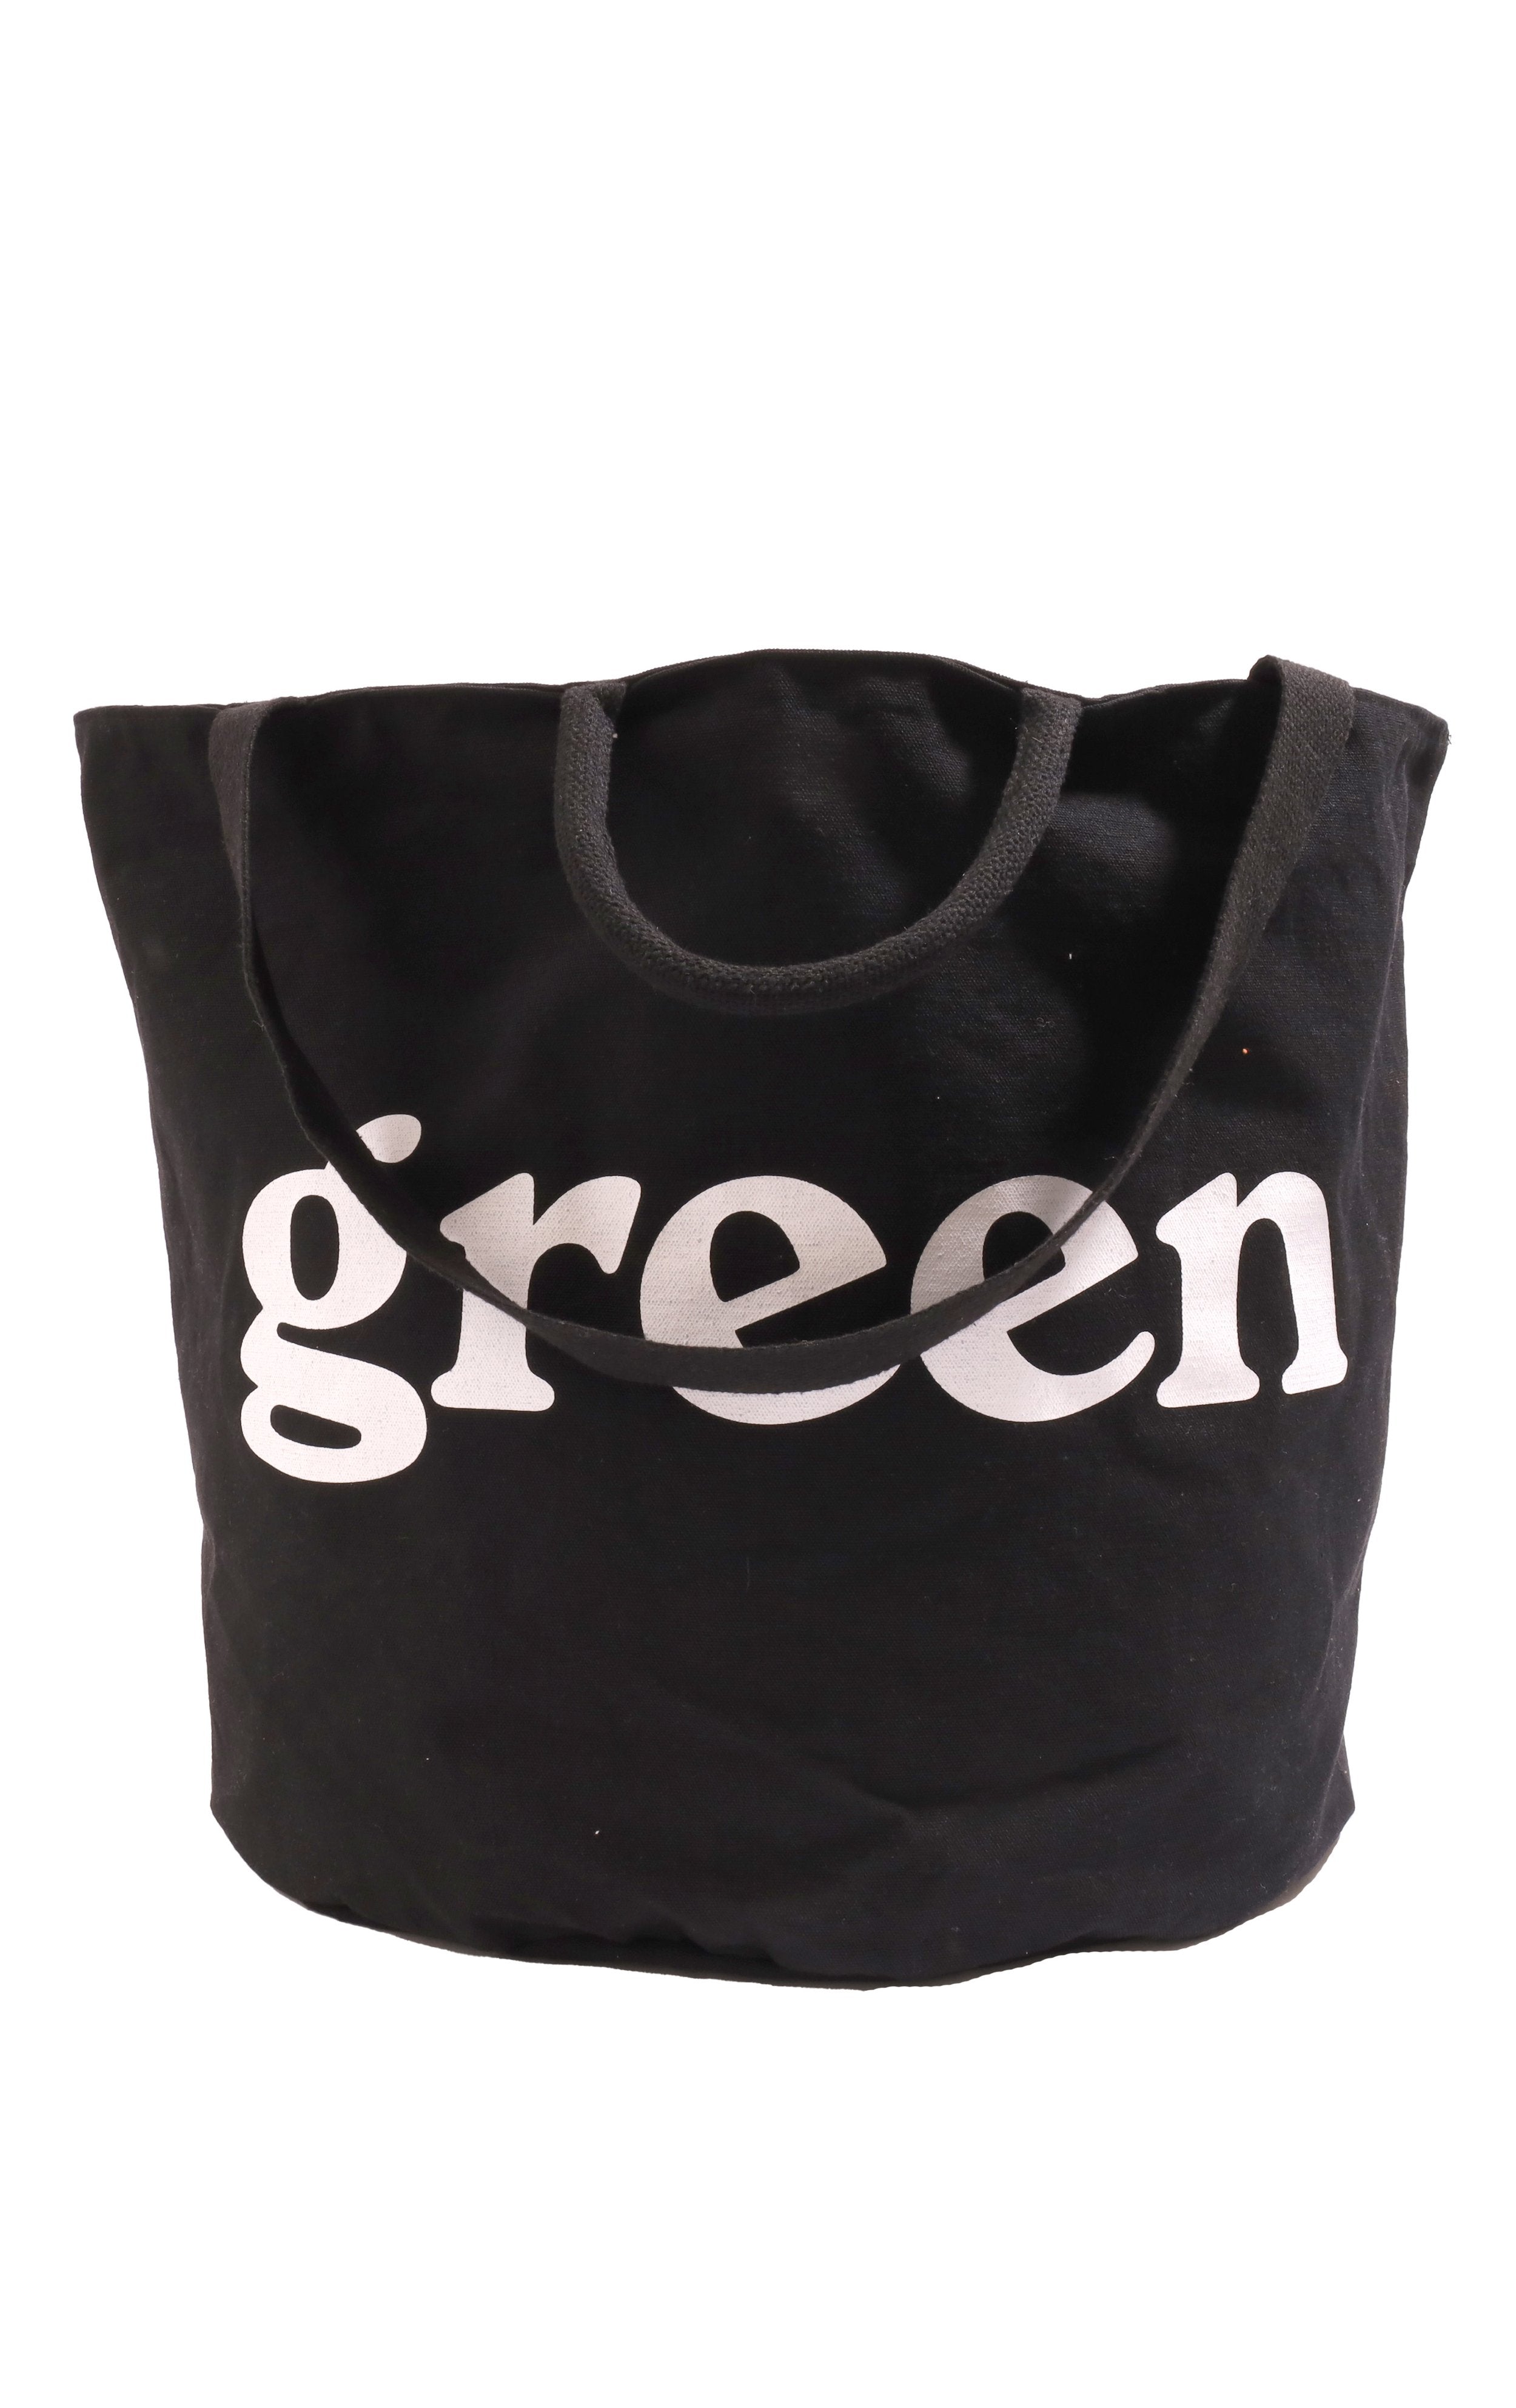 Large Round Tote / Grow Bag - Black-Mister Green-Mister Green